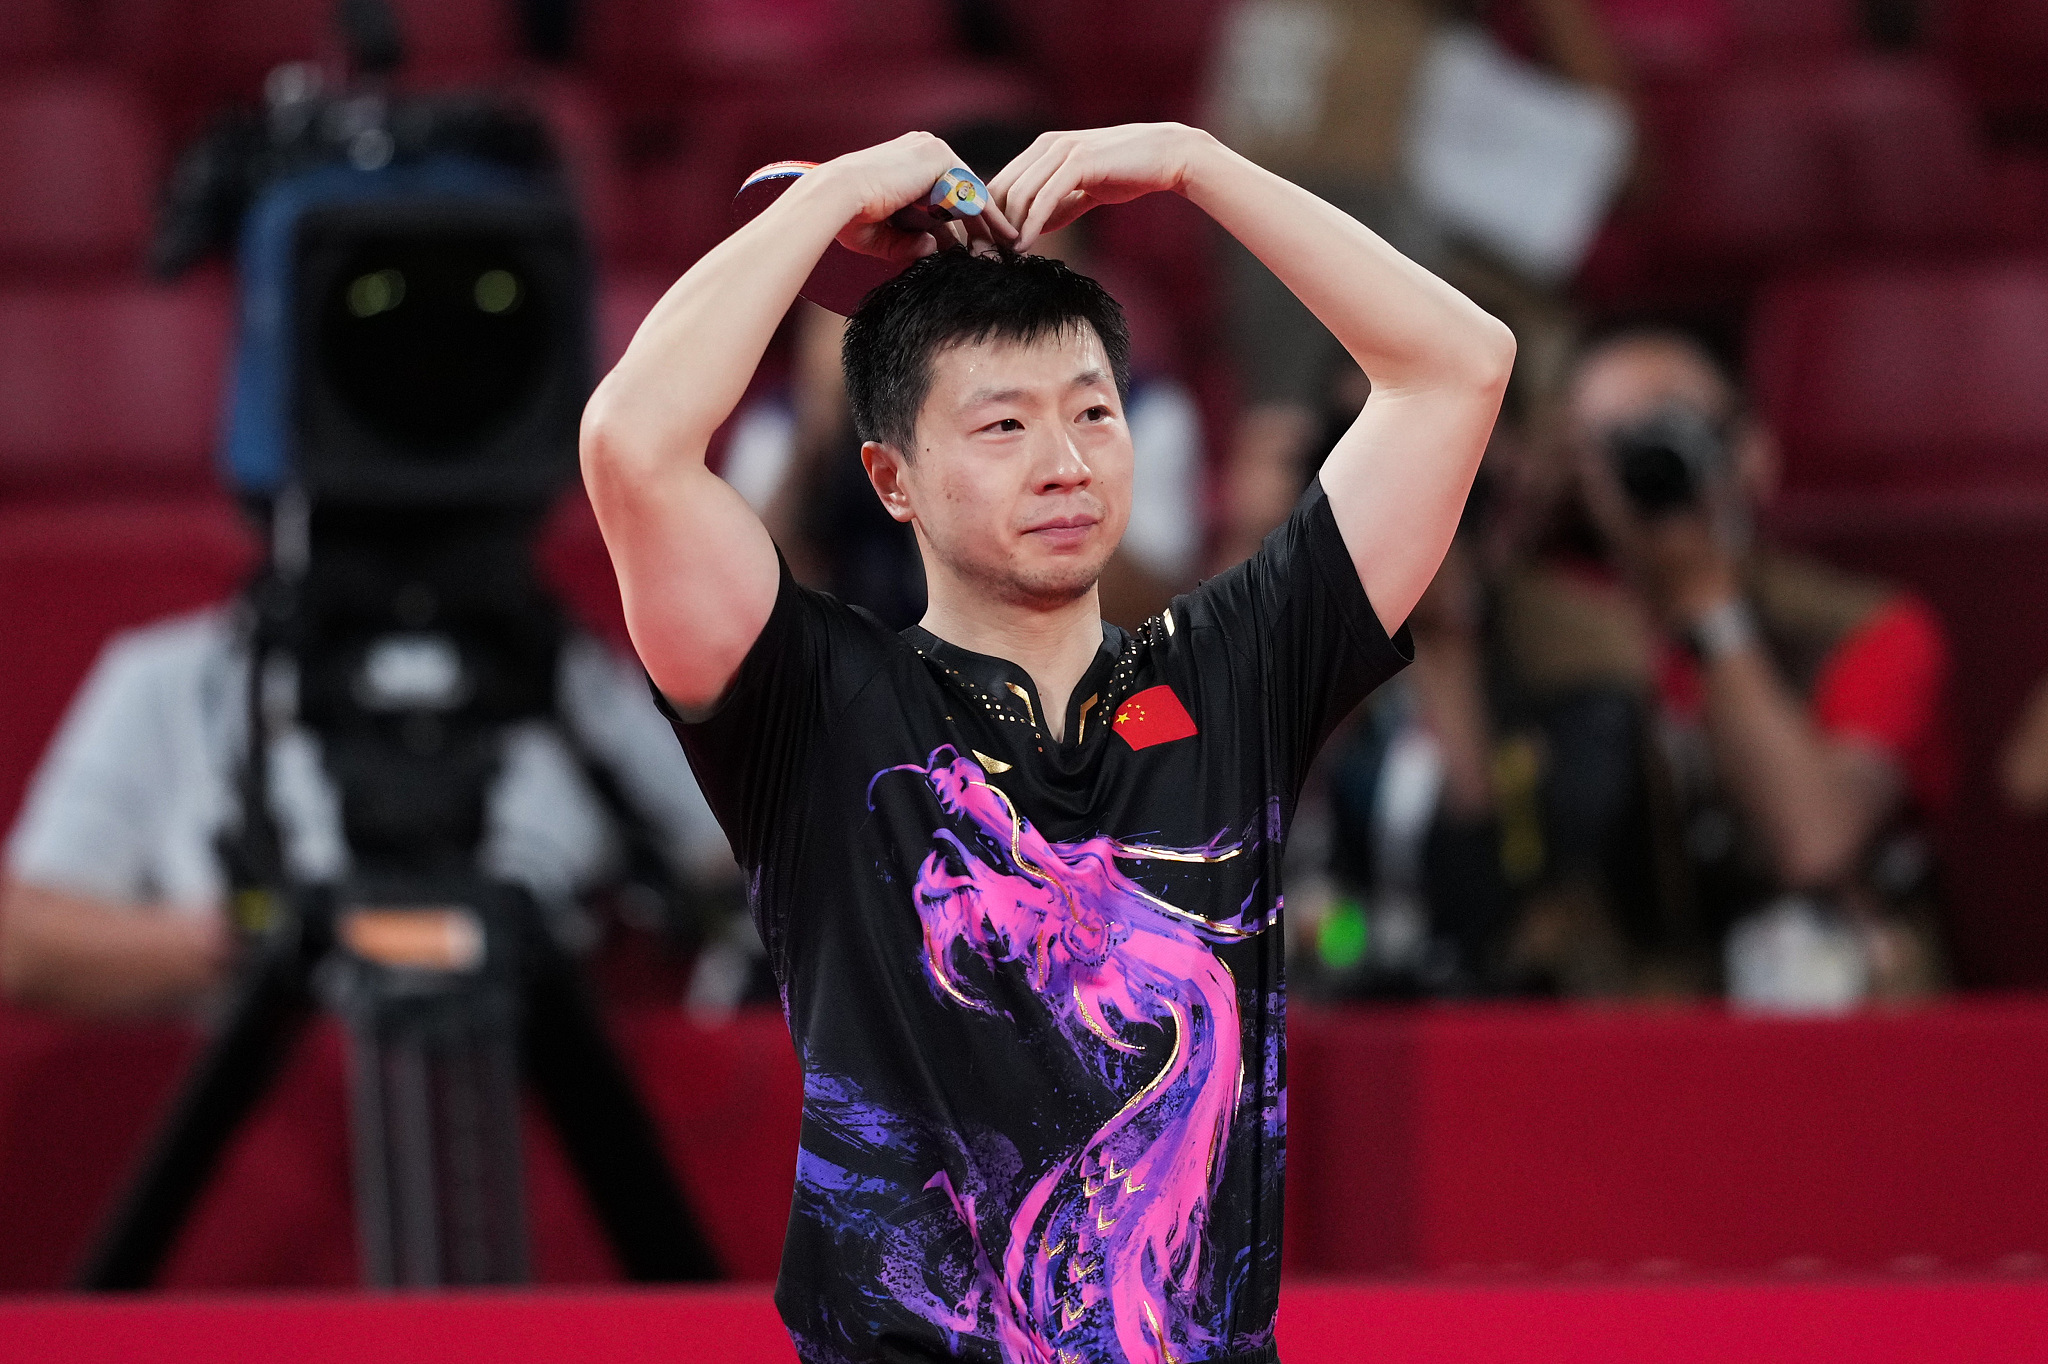 Ma Long defeatS compatriot Fan Zhendong (not pictured) to win the table tennis men's singles title during the Tokyo 2020 Olympic Games in Tokyo, Japan, July 30, 2021. /CFP